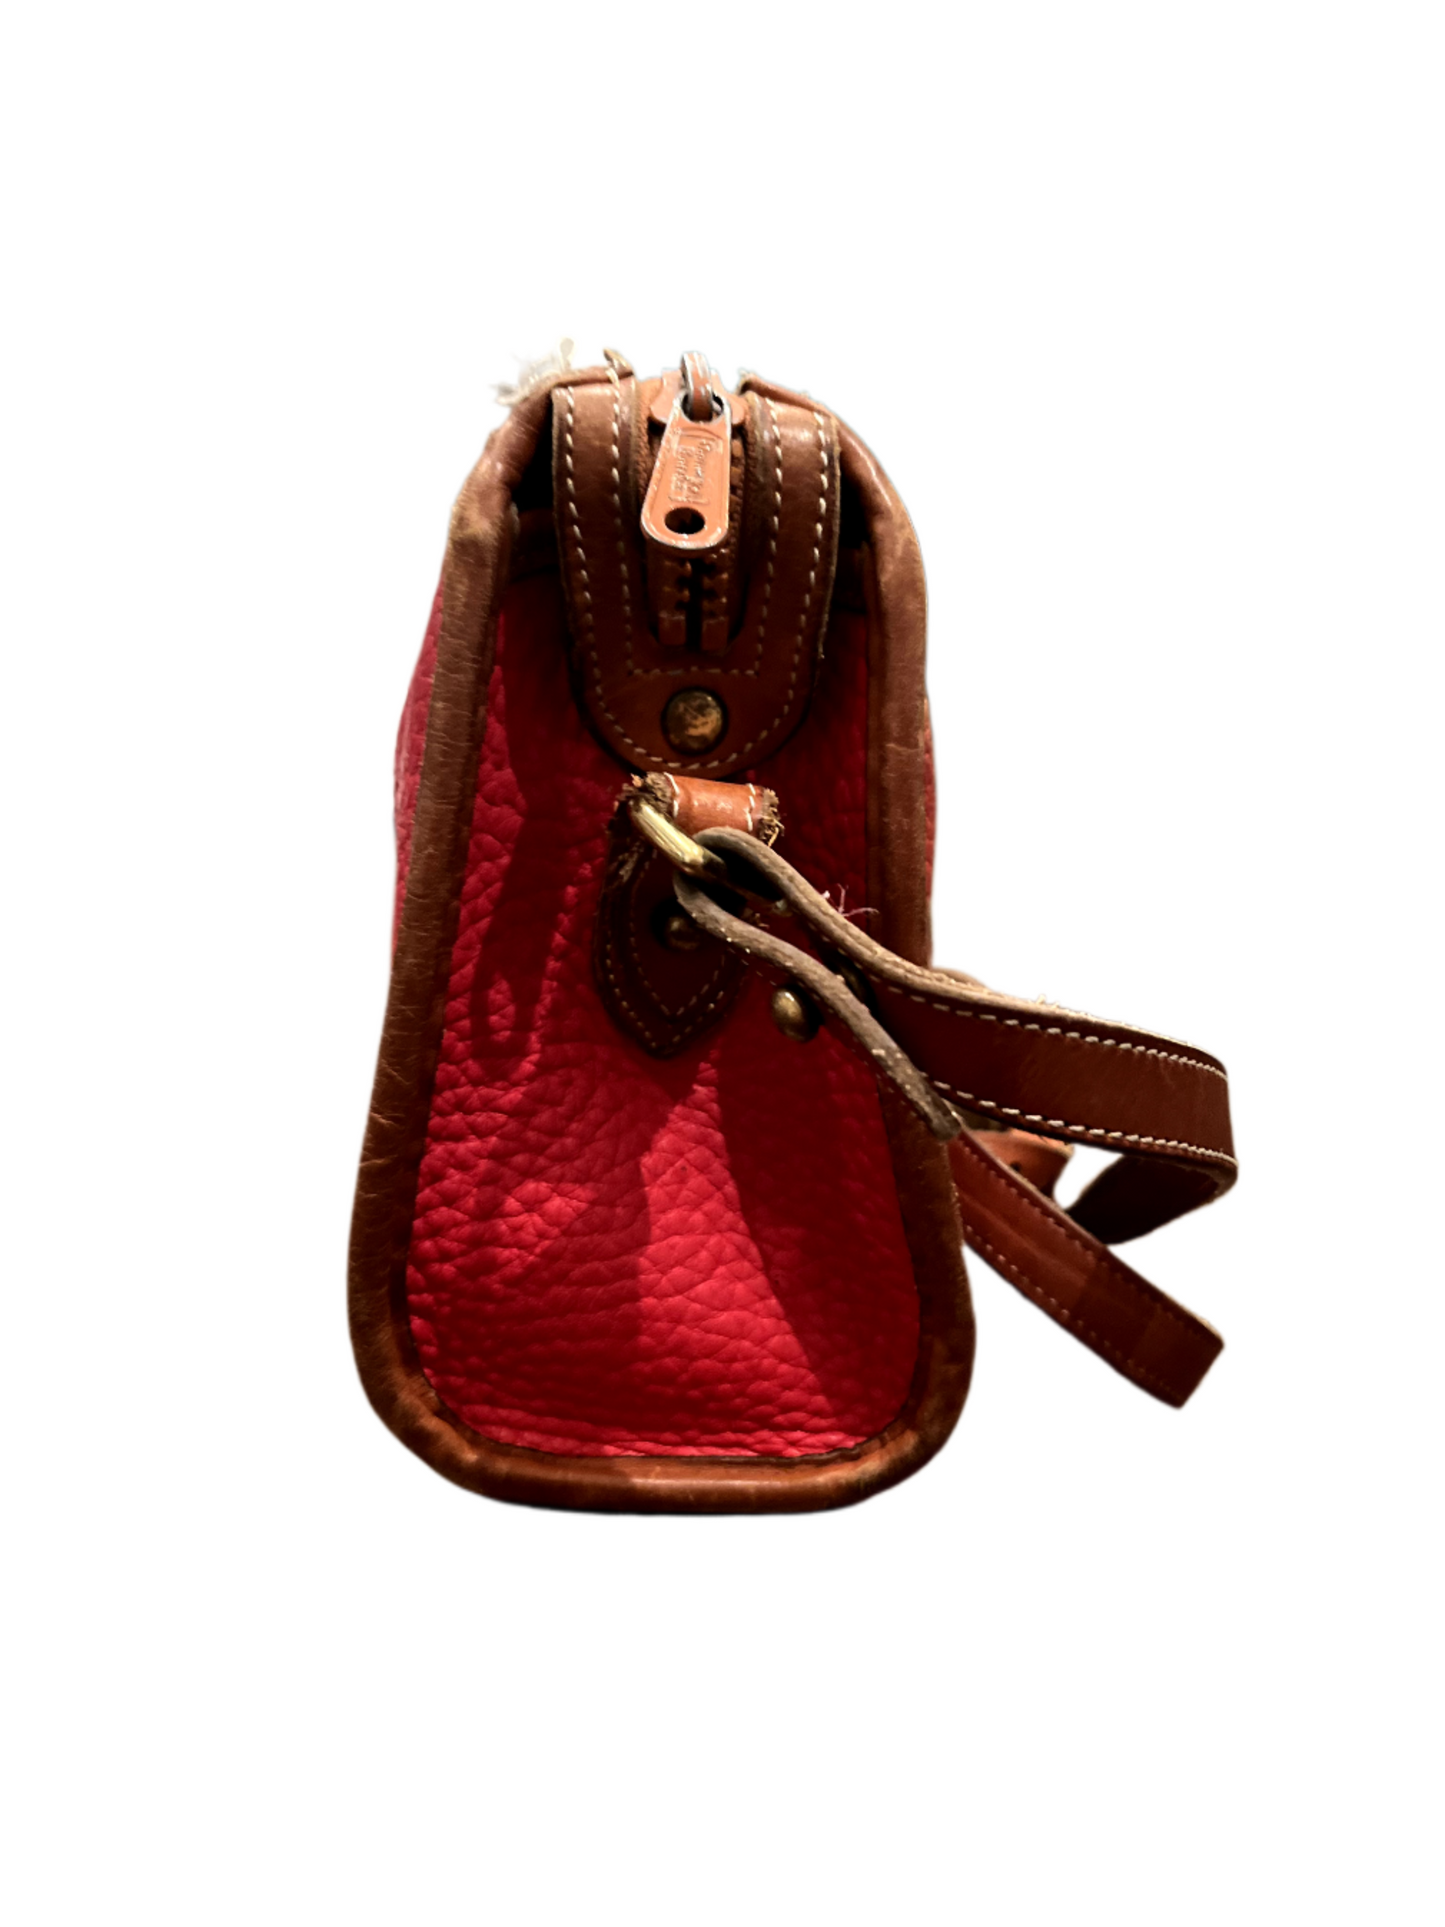 Side view of red Dooney & Bourke purse with tan leather strap on white background.